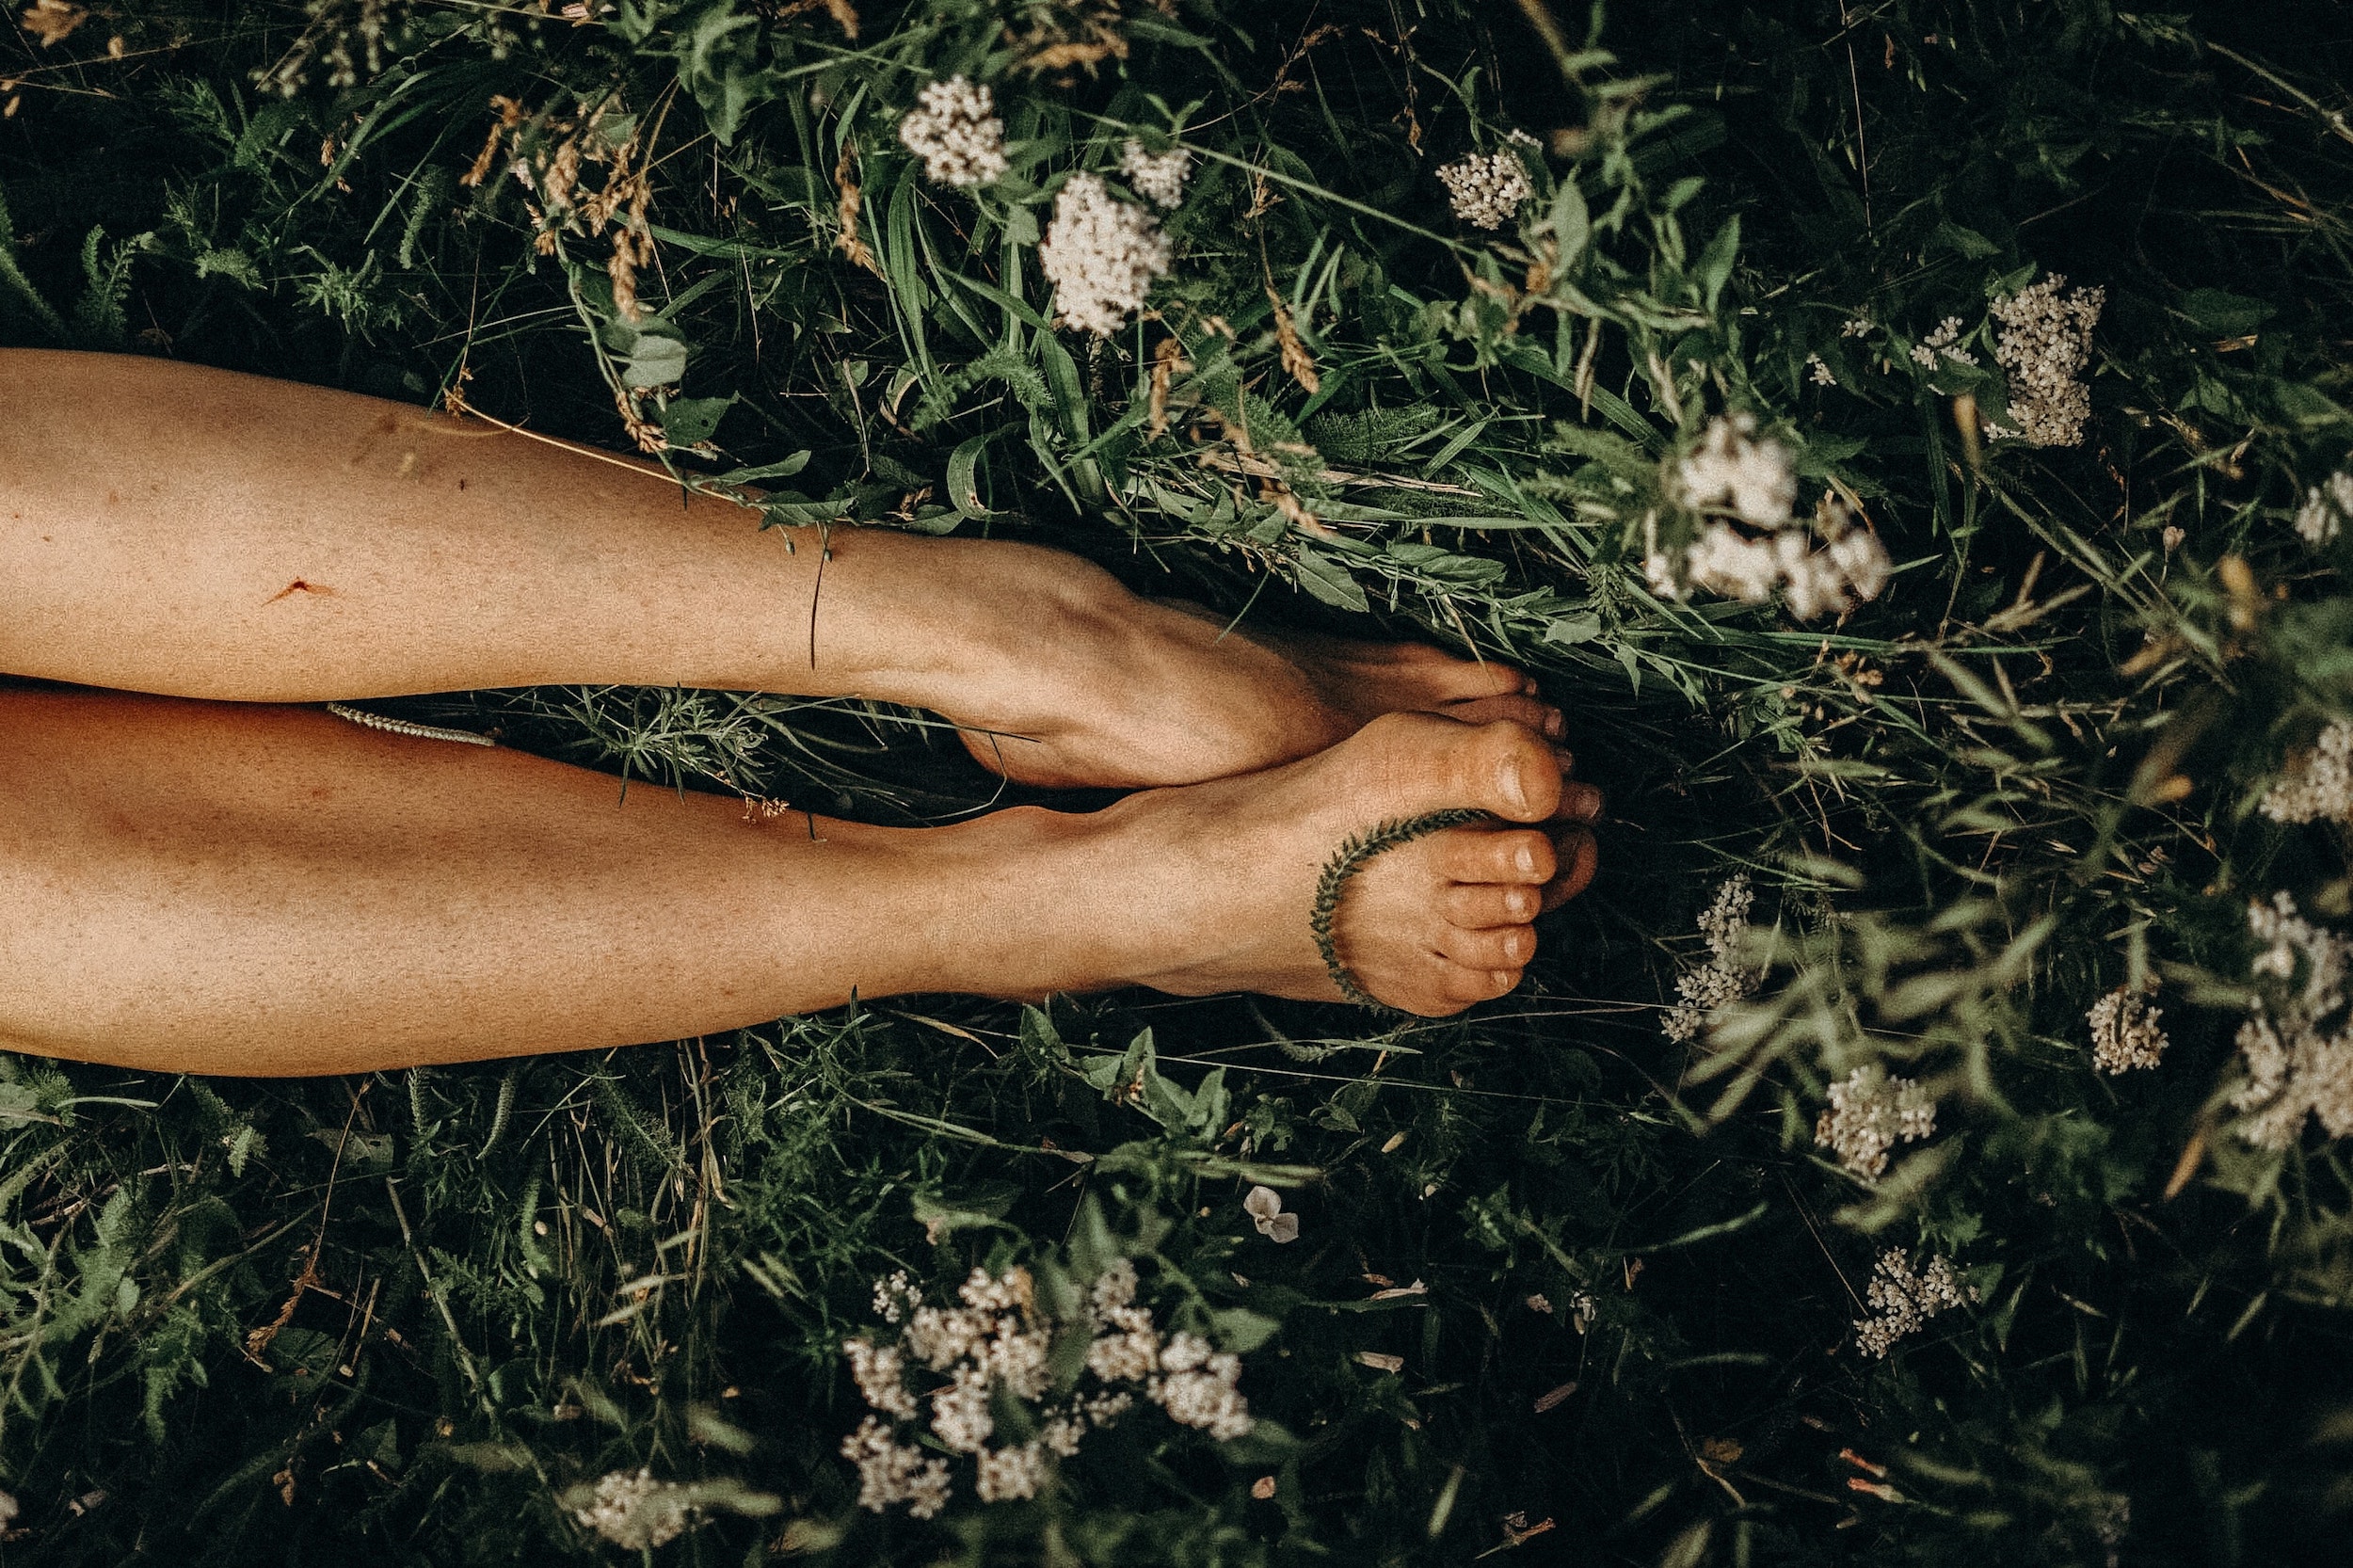 Is Barefoot Running Better? - Countryside Orthopaedics